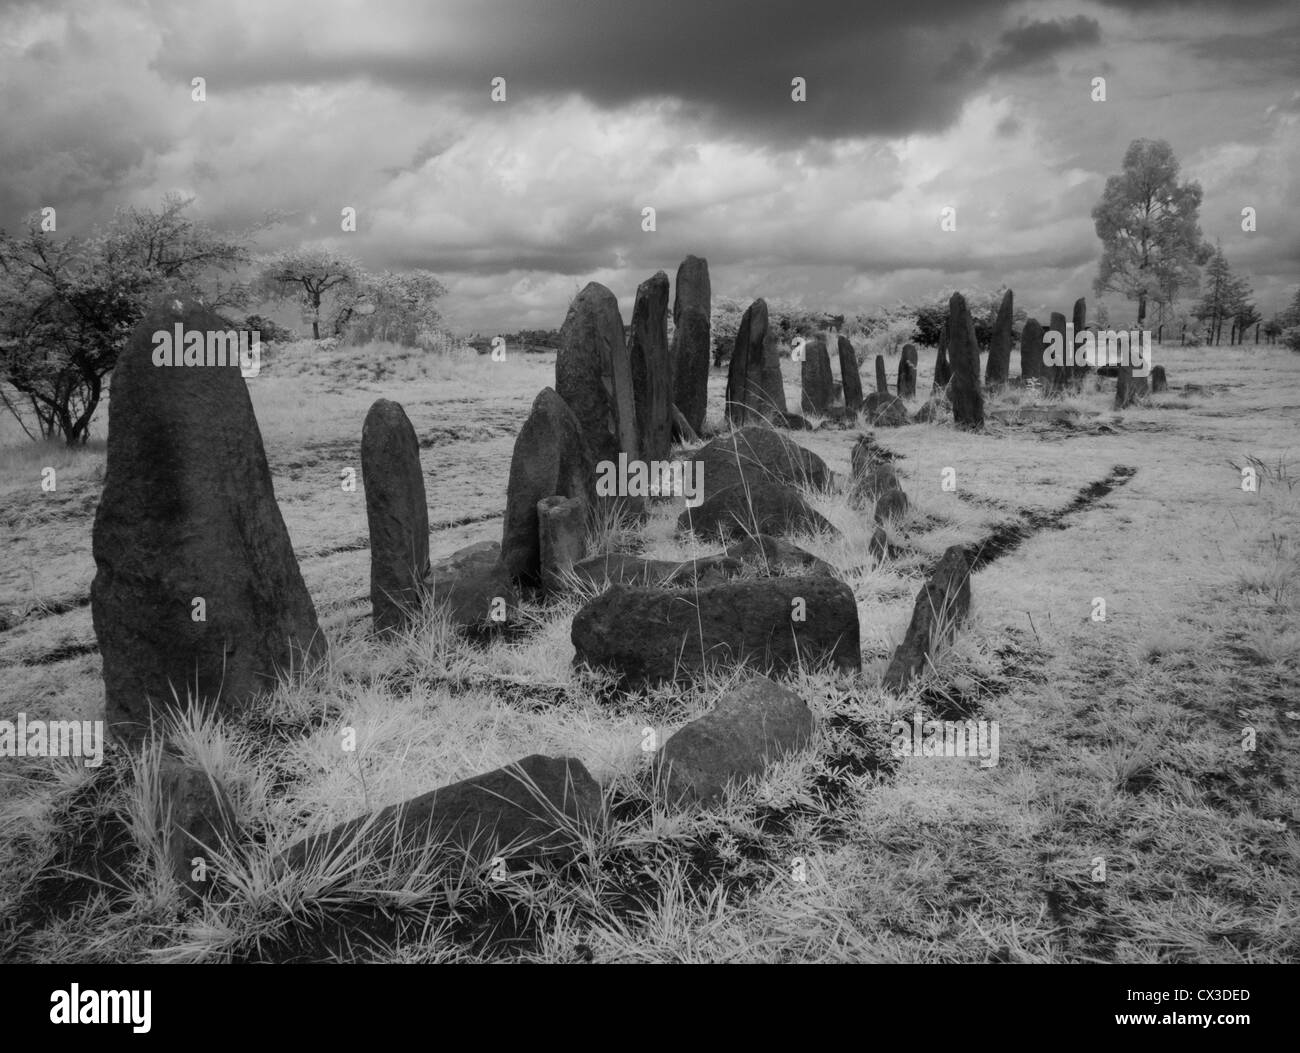 Tiya World Heritage Site Africa Infrared B&W ancient burial place in 12th and 14th centuries graves Stock Photo